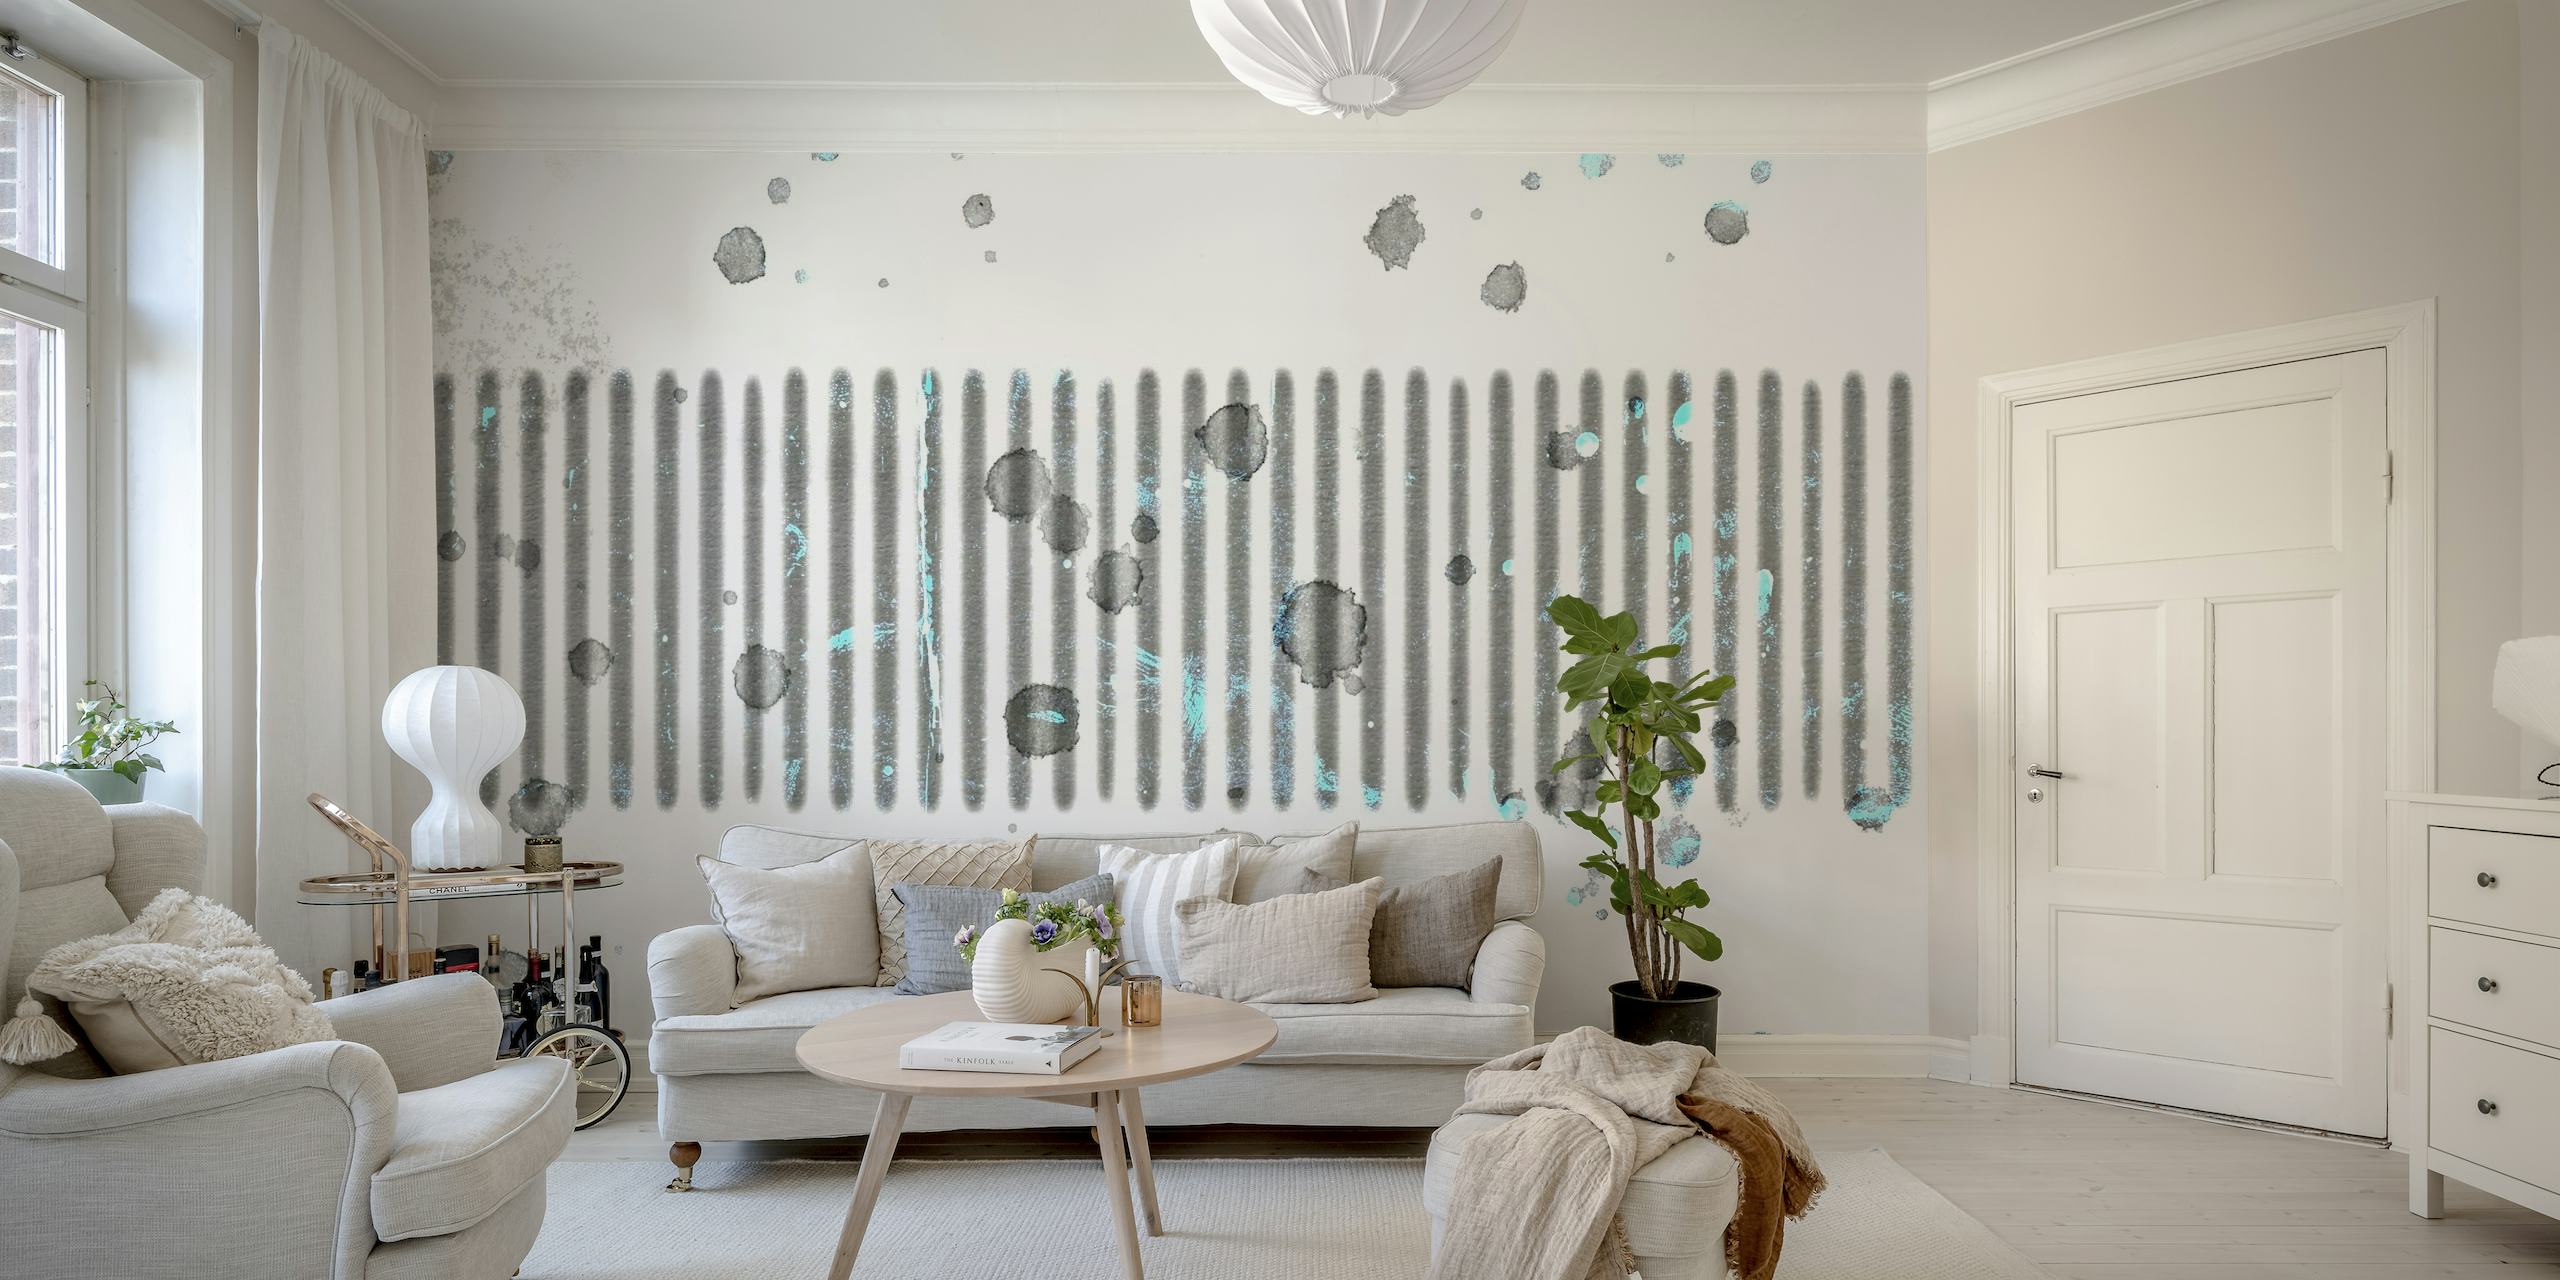 Abstract Watercolor Grunge wall mural with soft blue and grey hues